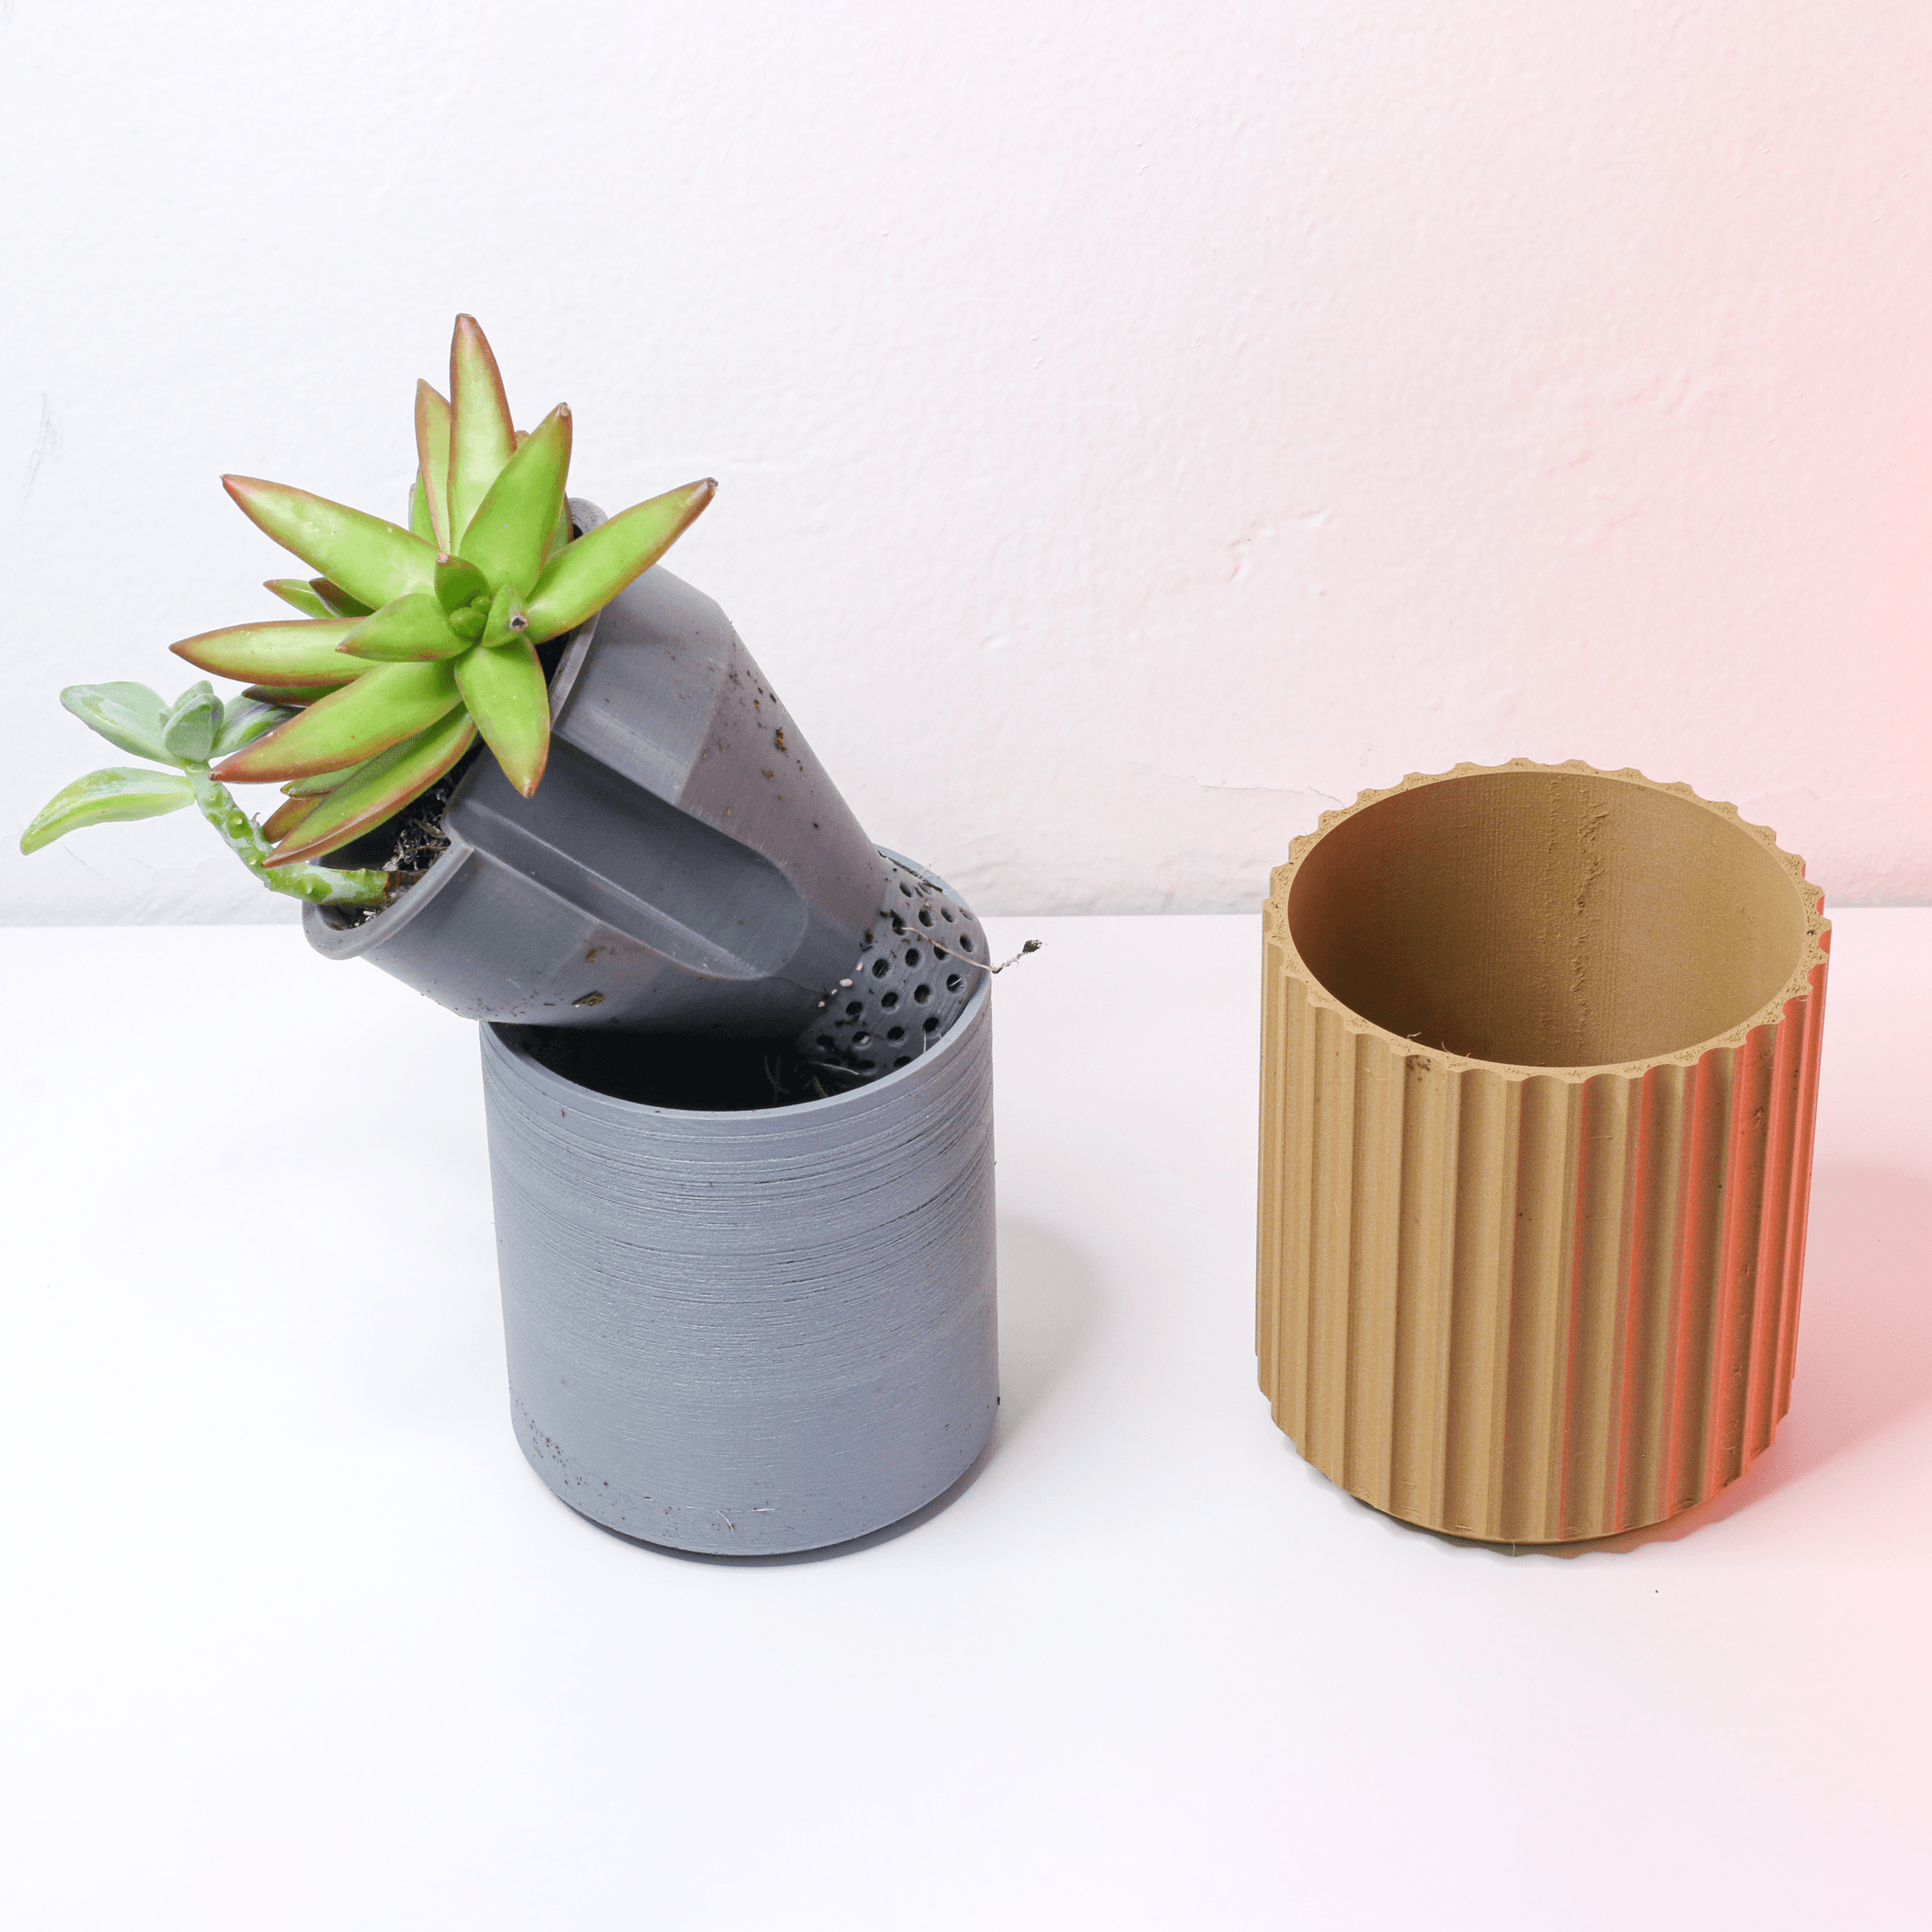 SELF WATERING PLANTER READY TO BE PRINTED IN WOOD PLA - COLUMNS 3d model